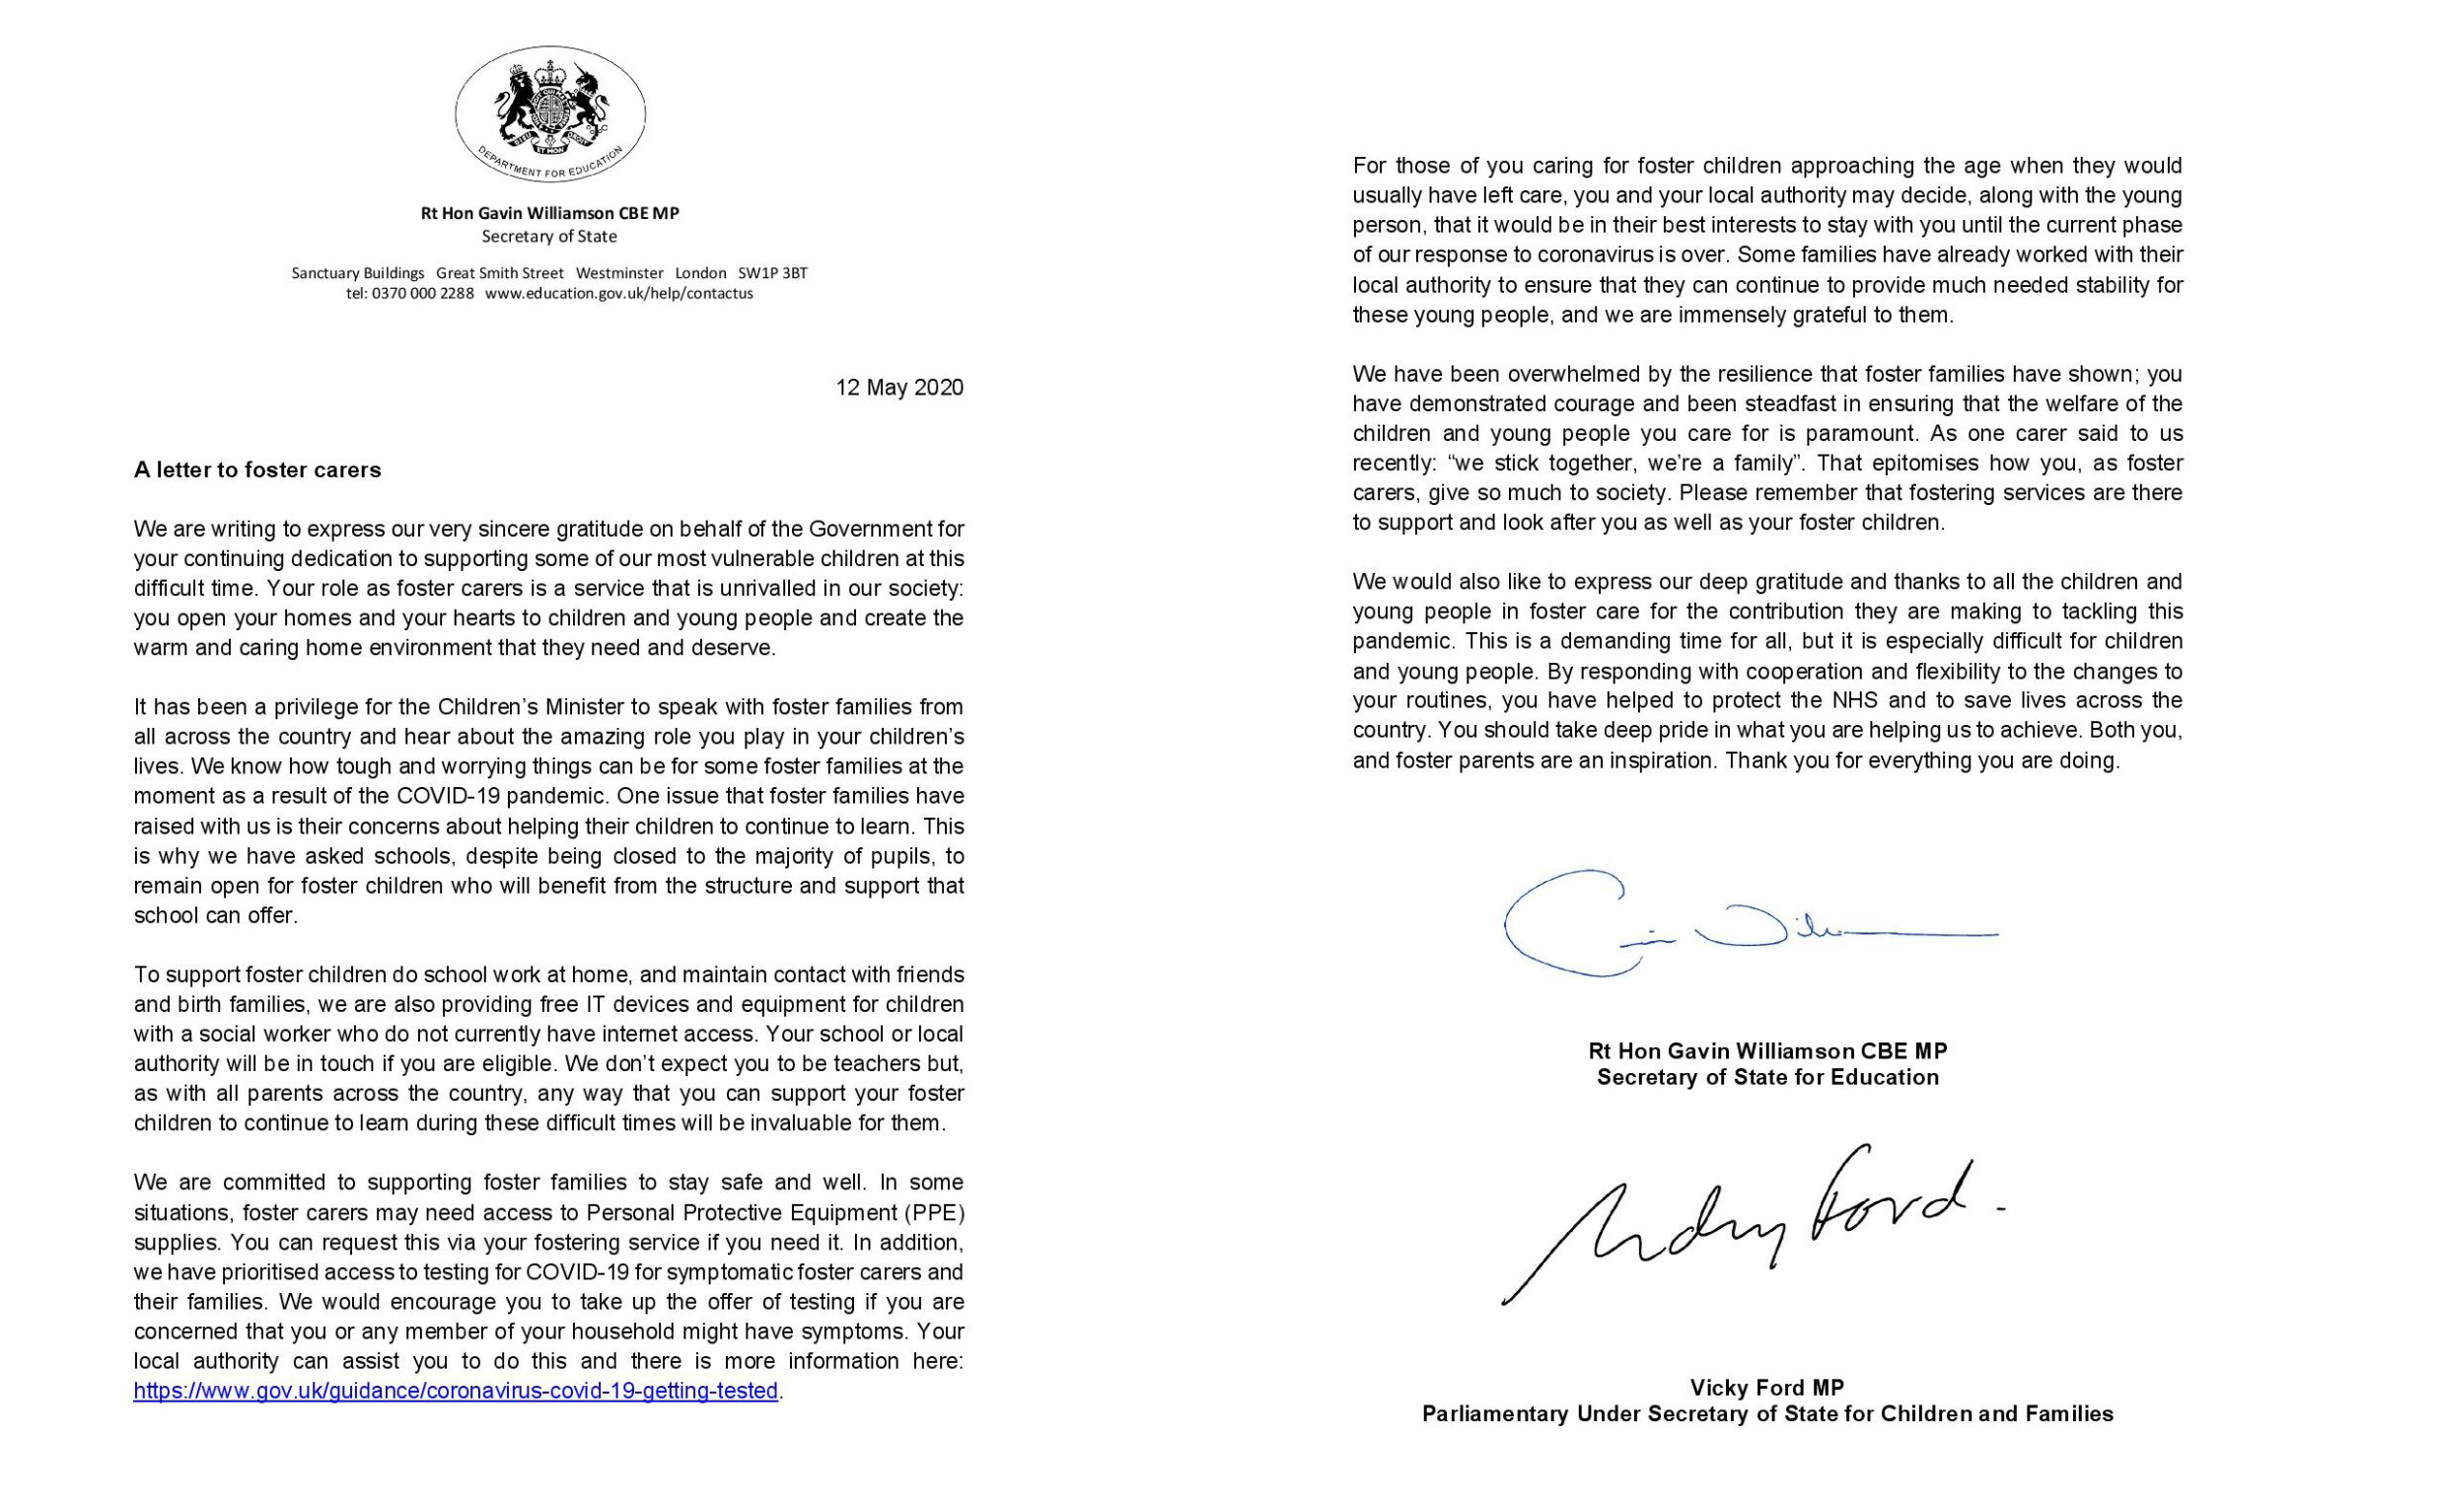 Letter to Foster Carers from Education Secretary and the Under Secretary of State for Children and Families, 12 May 2020